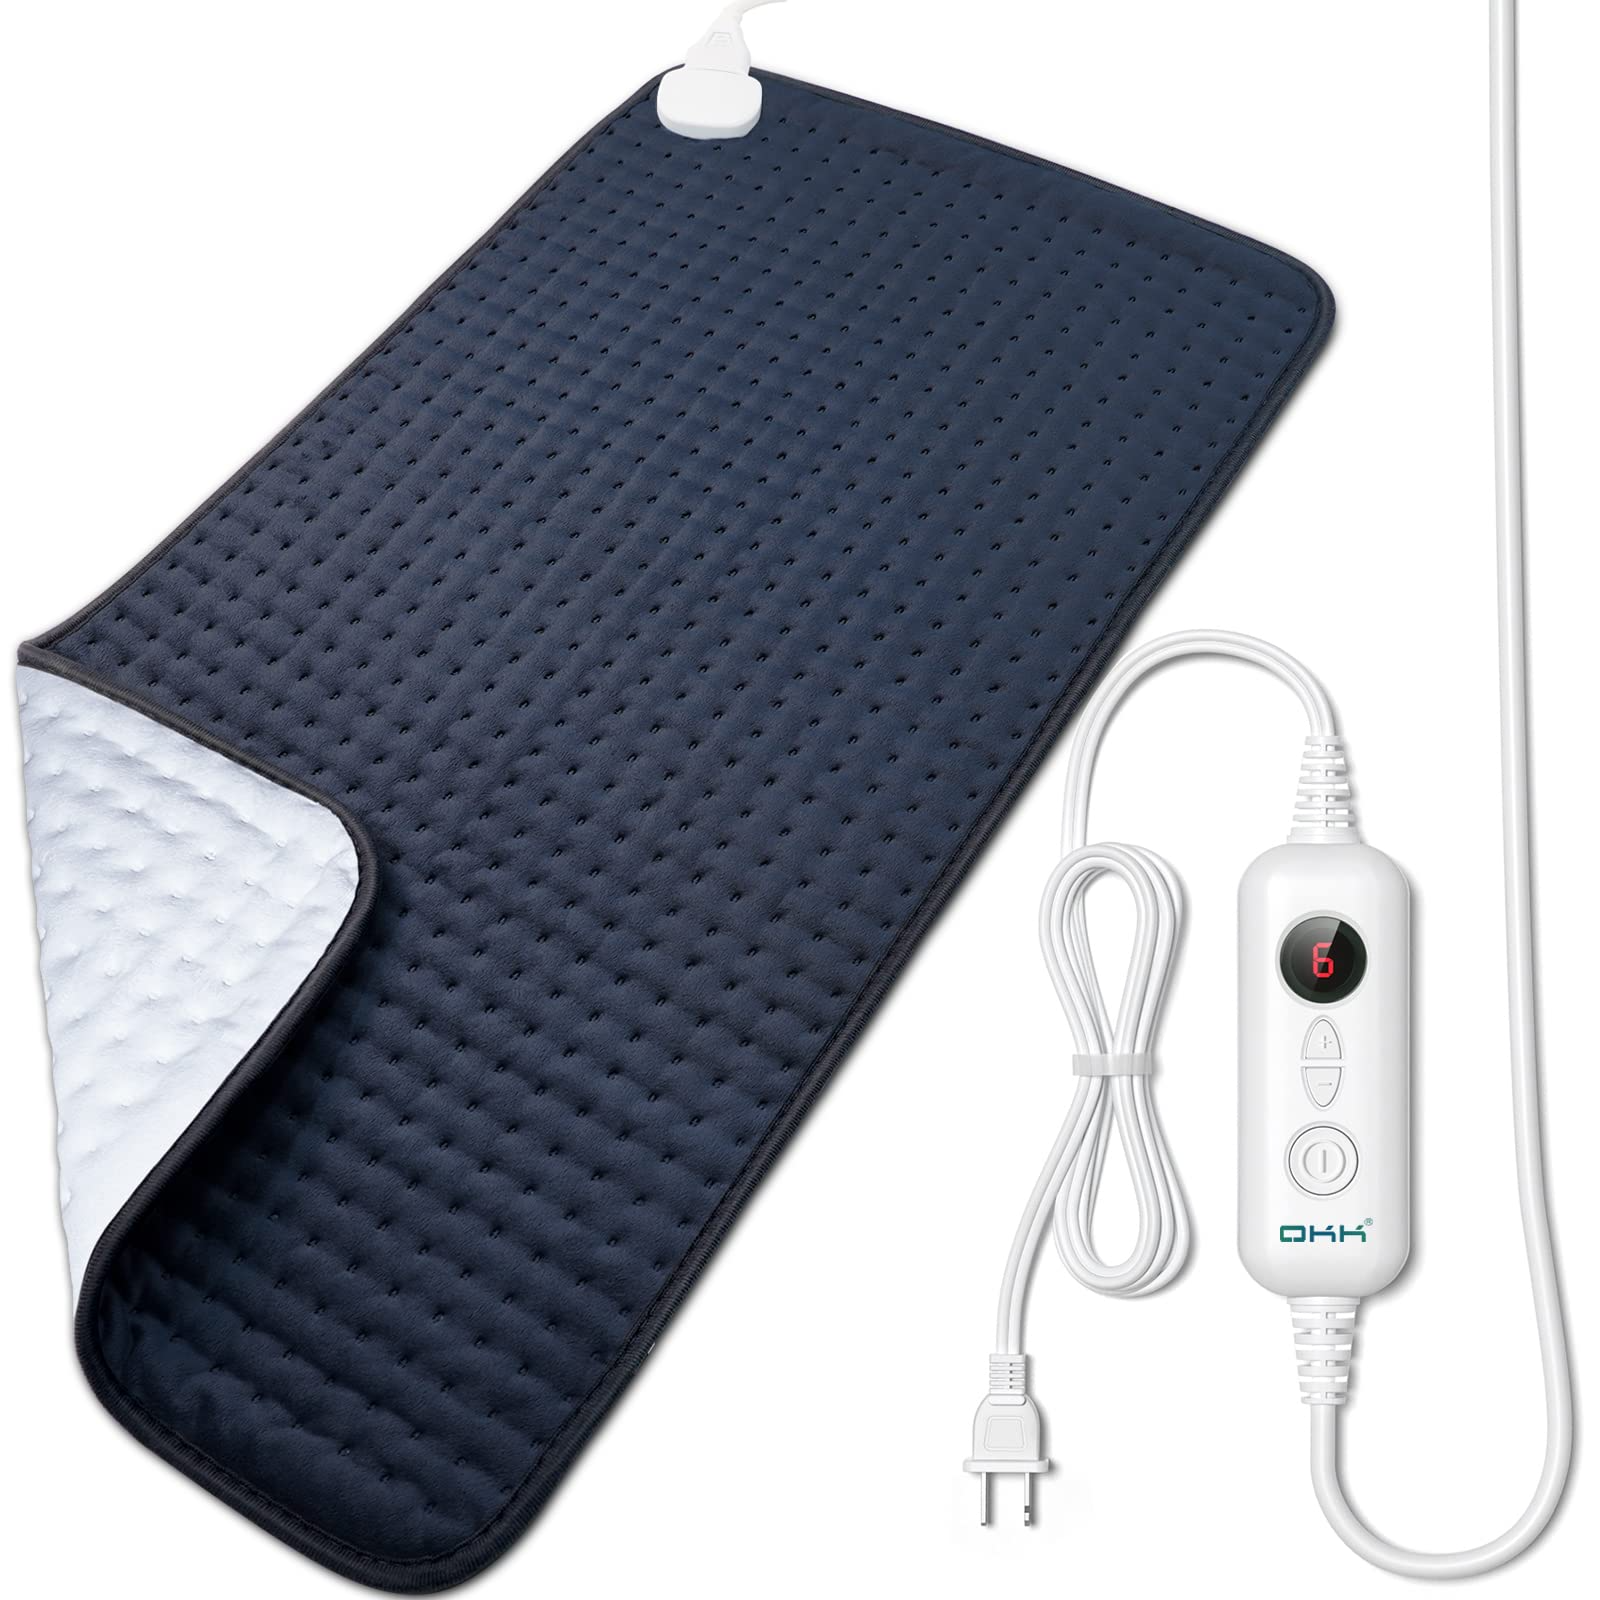 Heating Pad for Back Pain Relief, OKK 33" x 17" Electric Heating Pads for Cramps Neck Shoulders, King Size Heat Pad with 6 Heat Levels Auto Shut Off